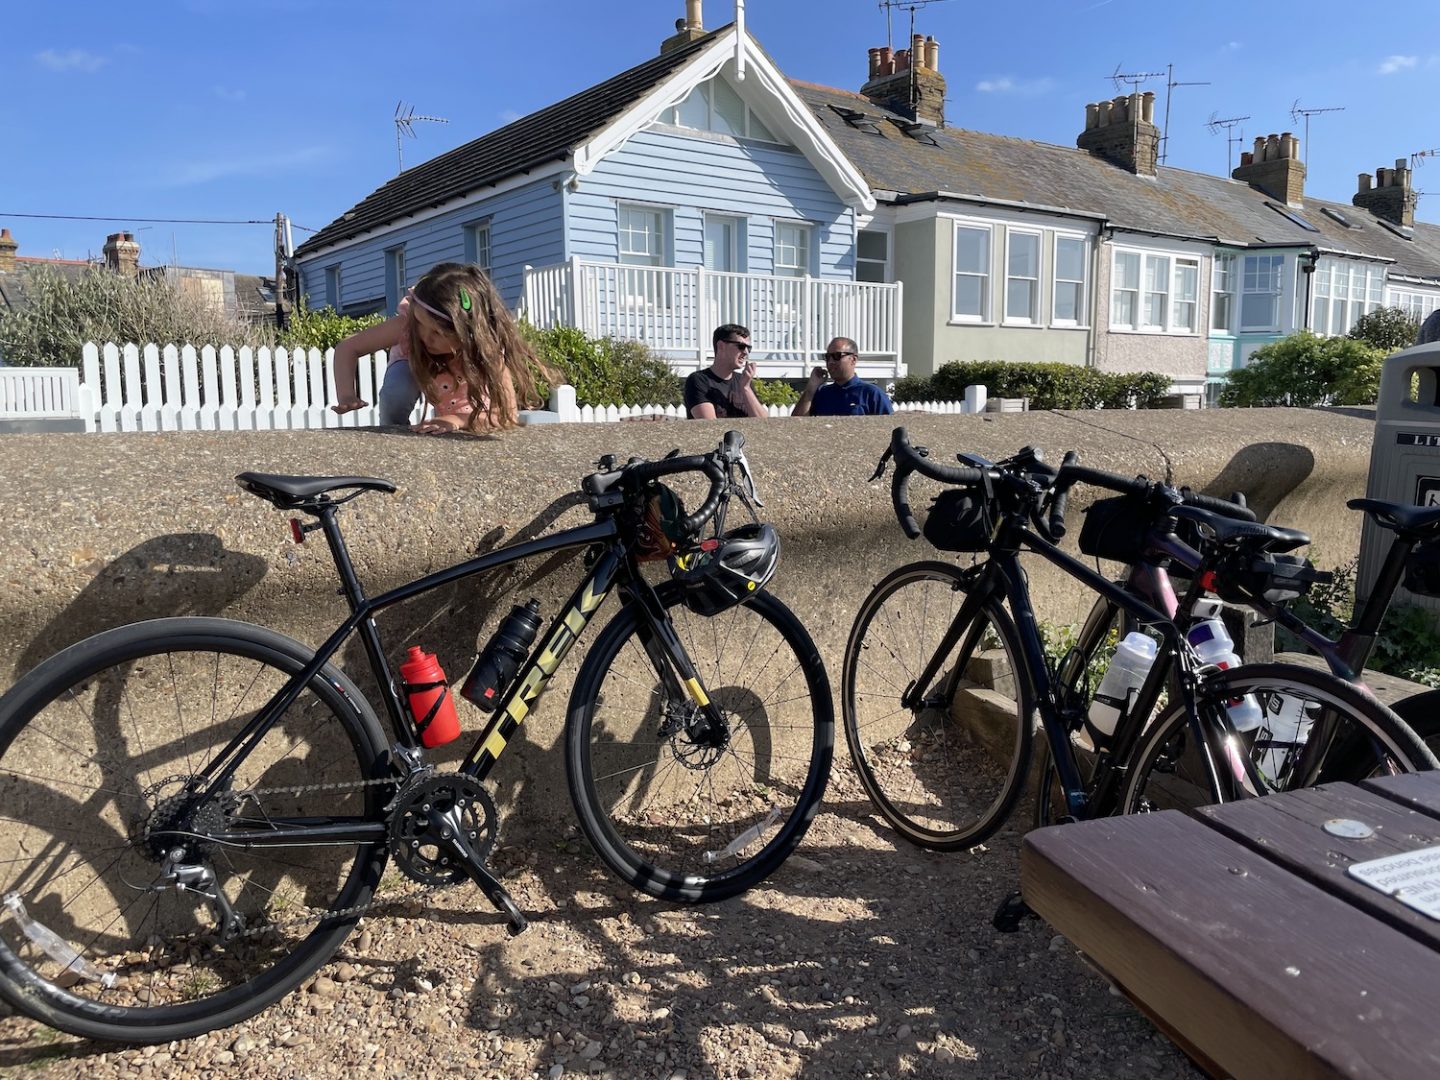 our bikes on the beach at Old Neptune, Whitstable